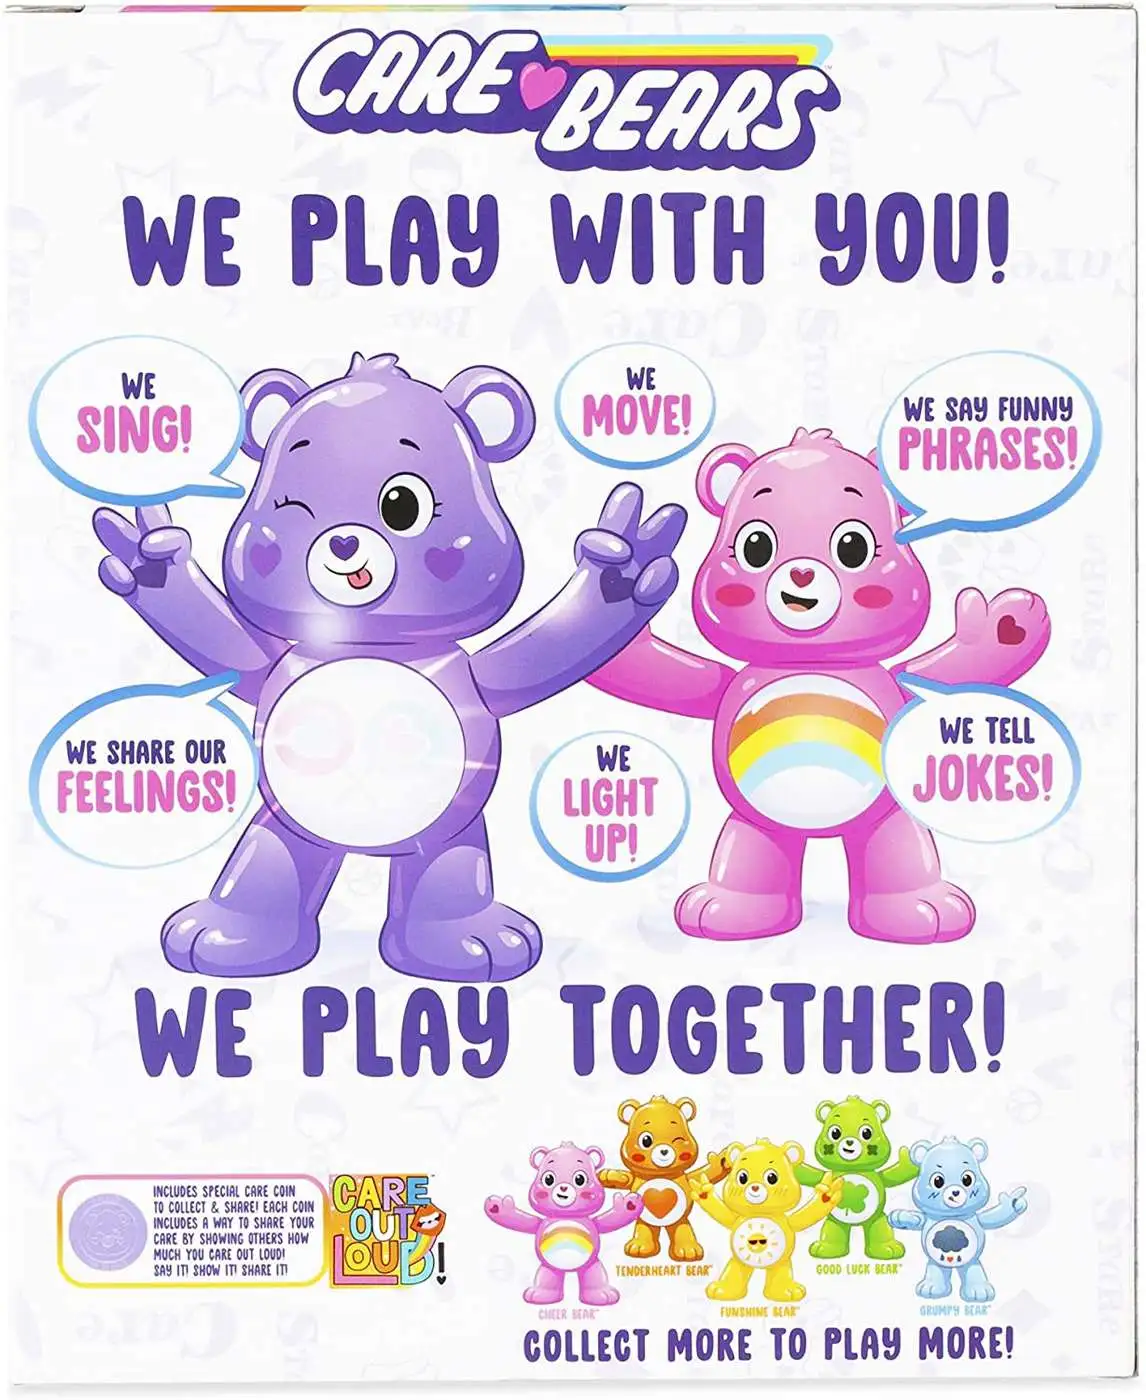 Care Bears Good Luck Bear Unlock The Magic Interactive Figure and Coin 2020 for sale online 